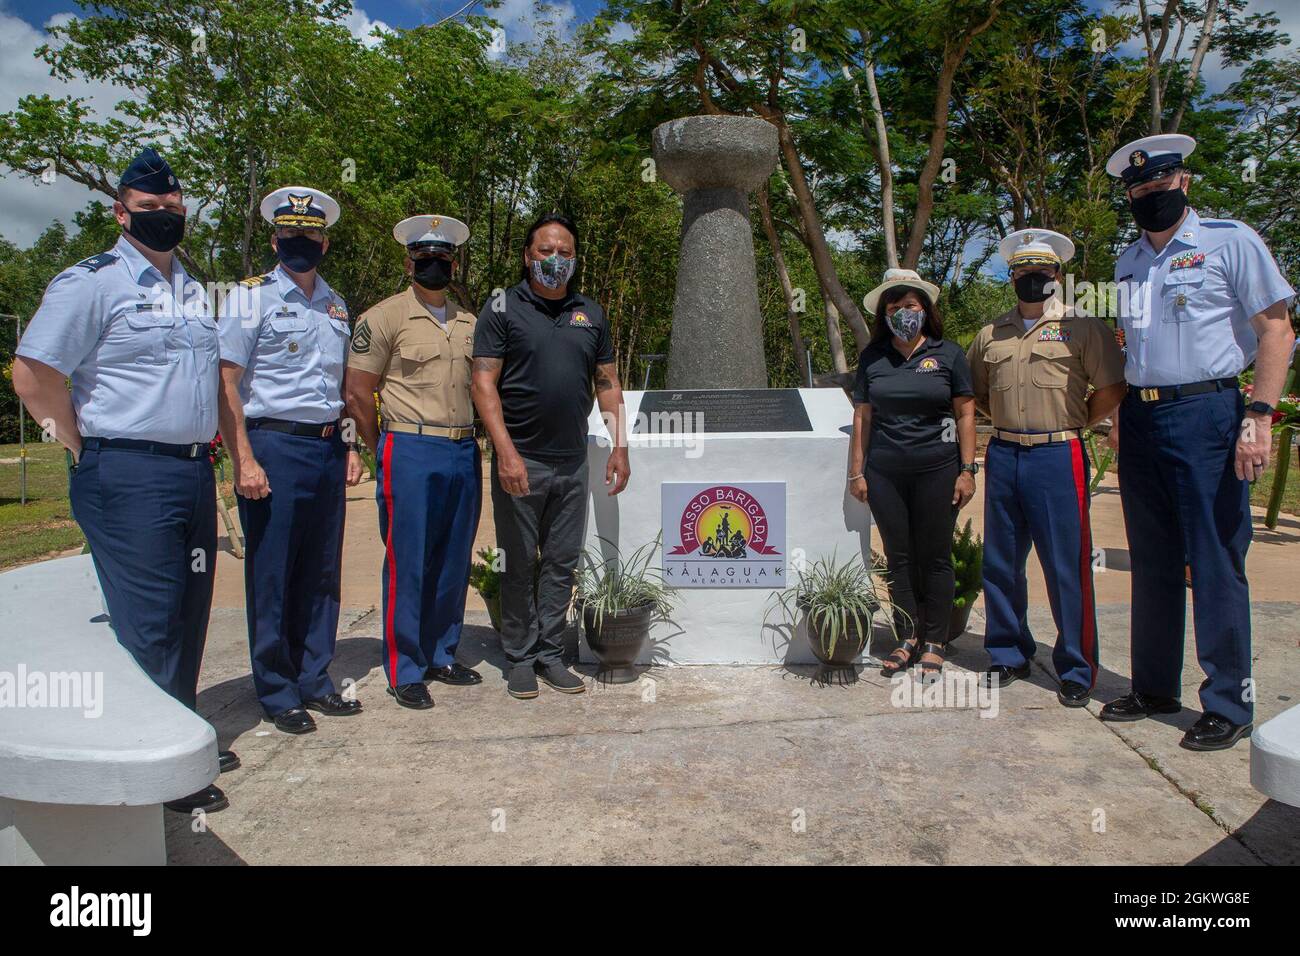 Marine Corps Base (MCB) Camp Blaz senior leaders pose for a photograph with other senior military leaders and the mayor and vice mayor of Barrigada, Guam in front of the Kǻlaguak memorial, July 9, 2021. The Kǻlaguak memorial is located at the site of a former Japanese military airfield. The memorial service was among the many held across the island to commemorate the liberation of Guam during World War II in 1944. Stock Photo